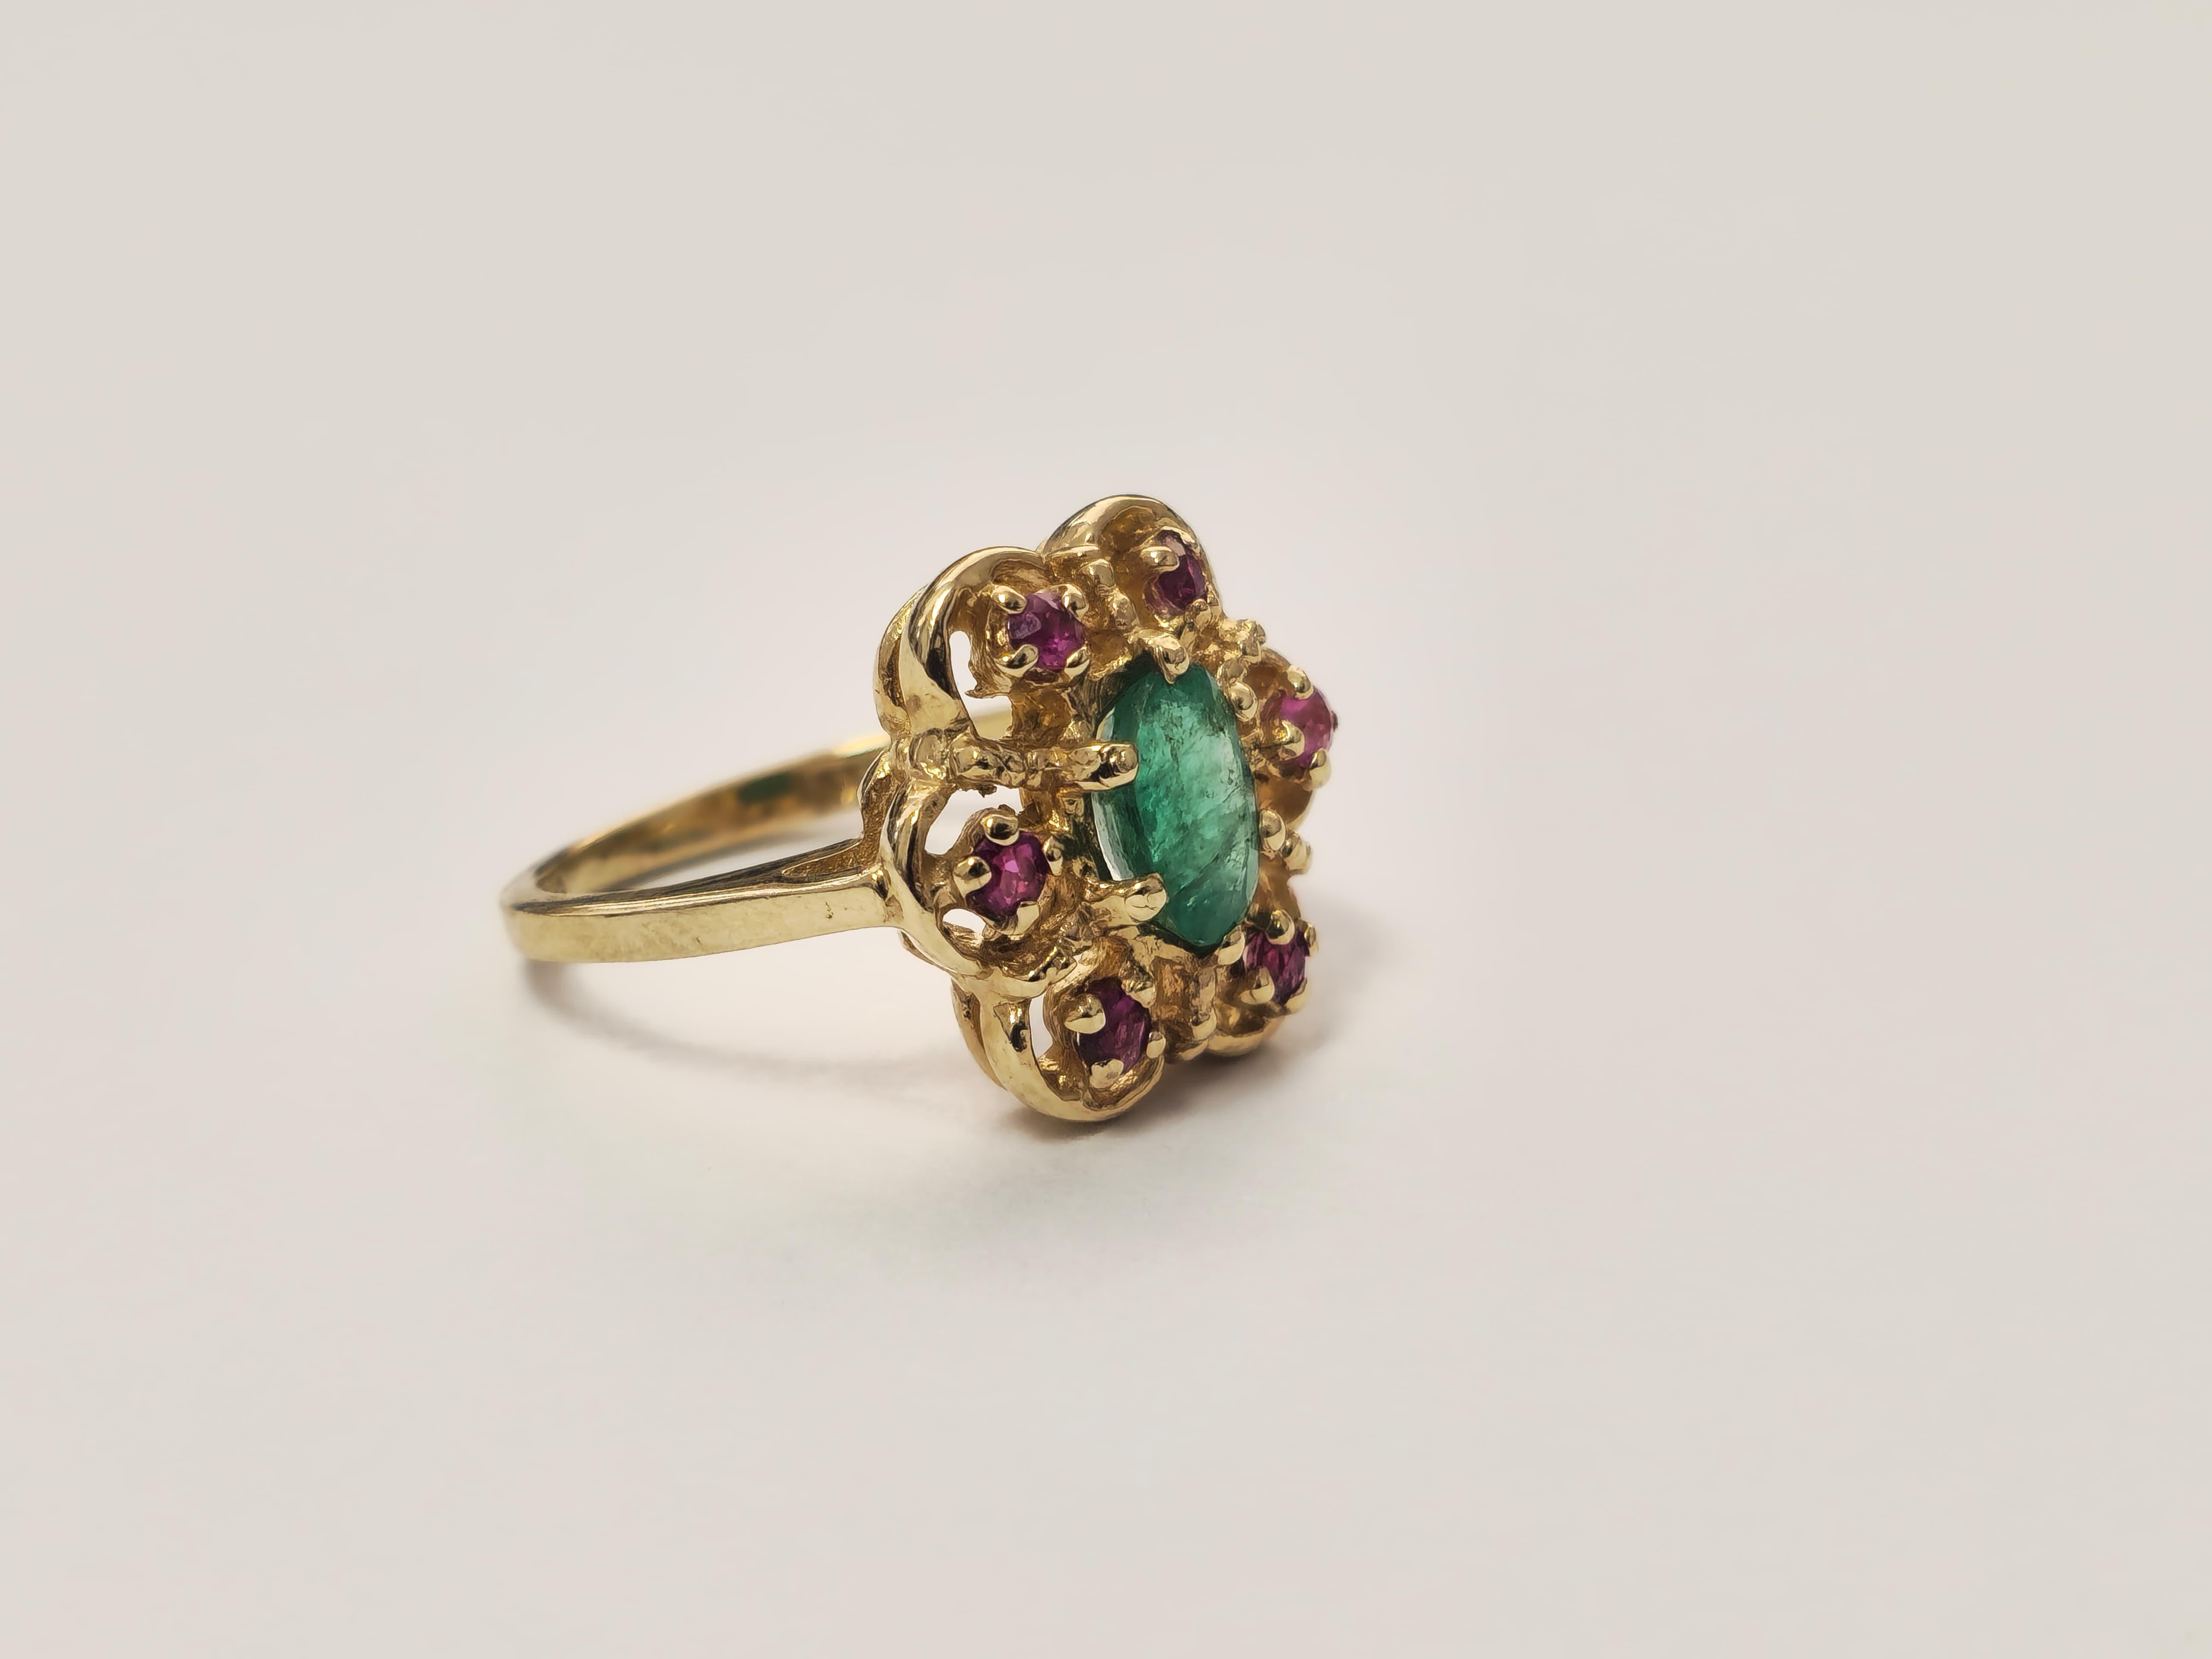 Elegant 14K Gold Ladies Ring with Ruby and Emerald In Excellent Condition For Sale In Miami, FL